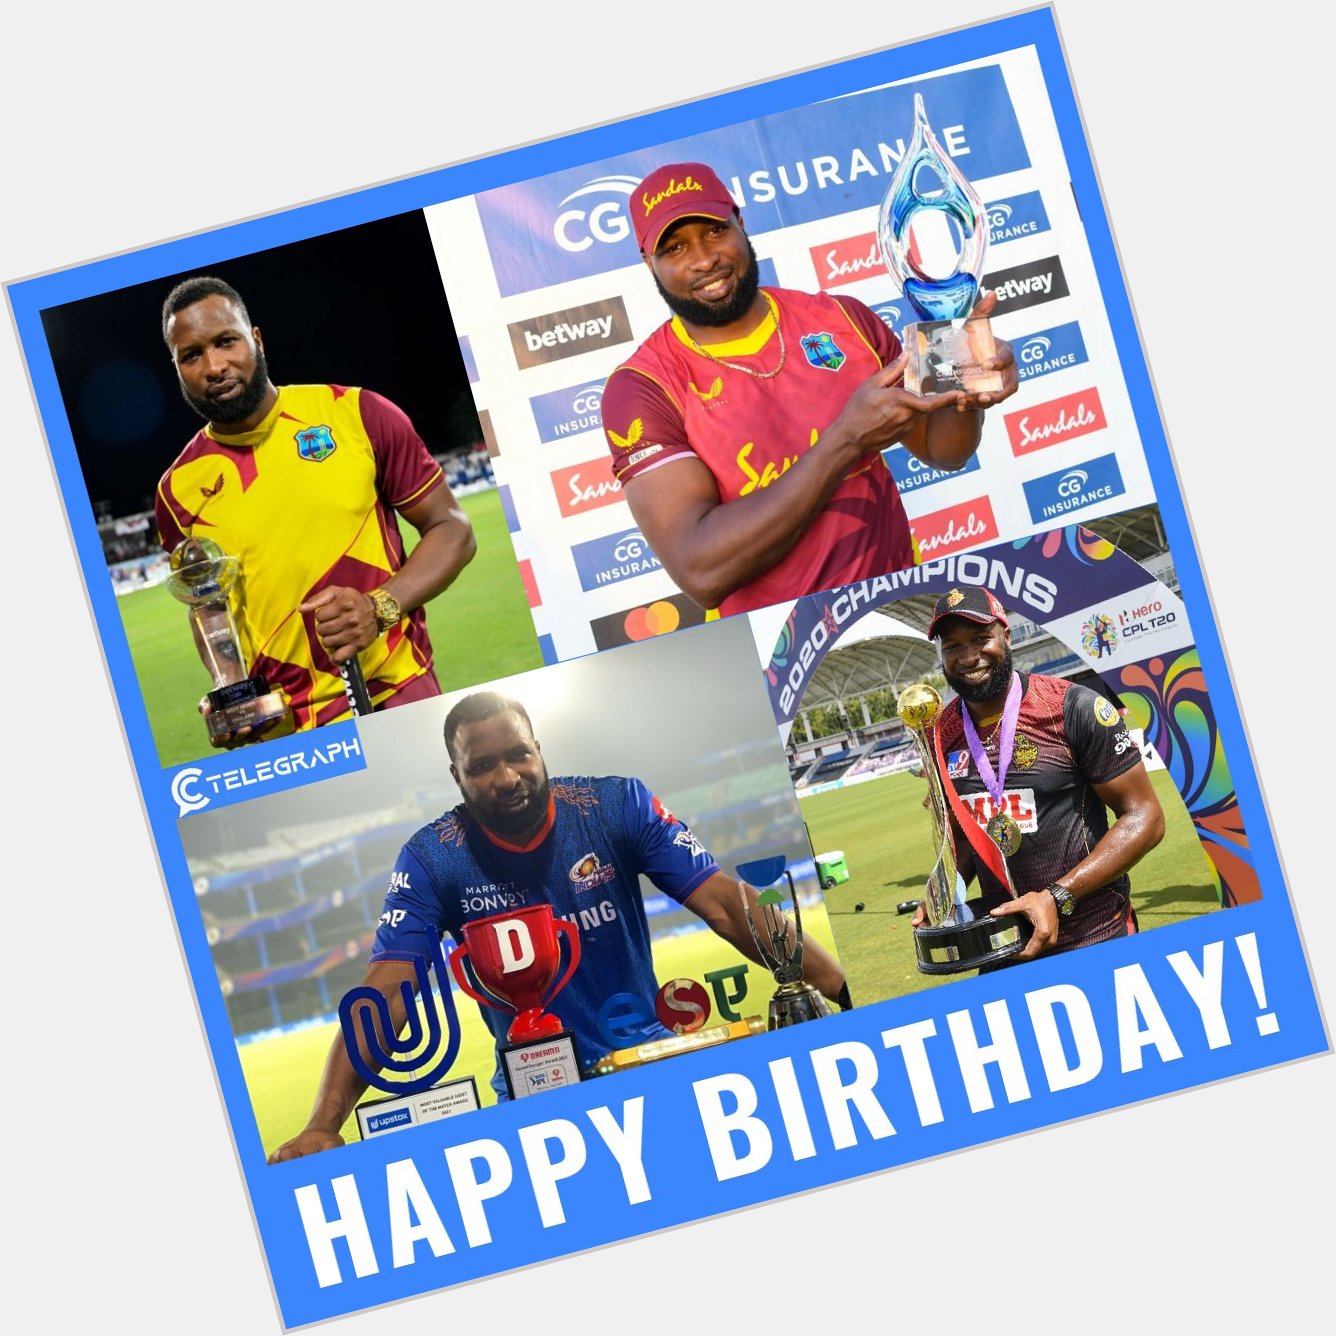 Happy Birthday to one of the best allrounders in the shortest format, Kieron Pollard 